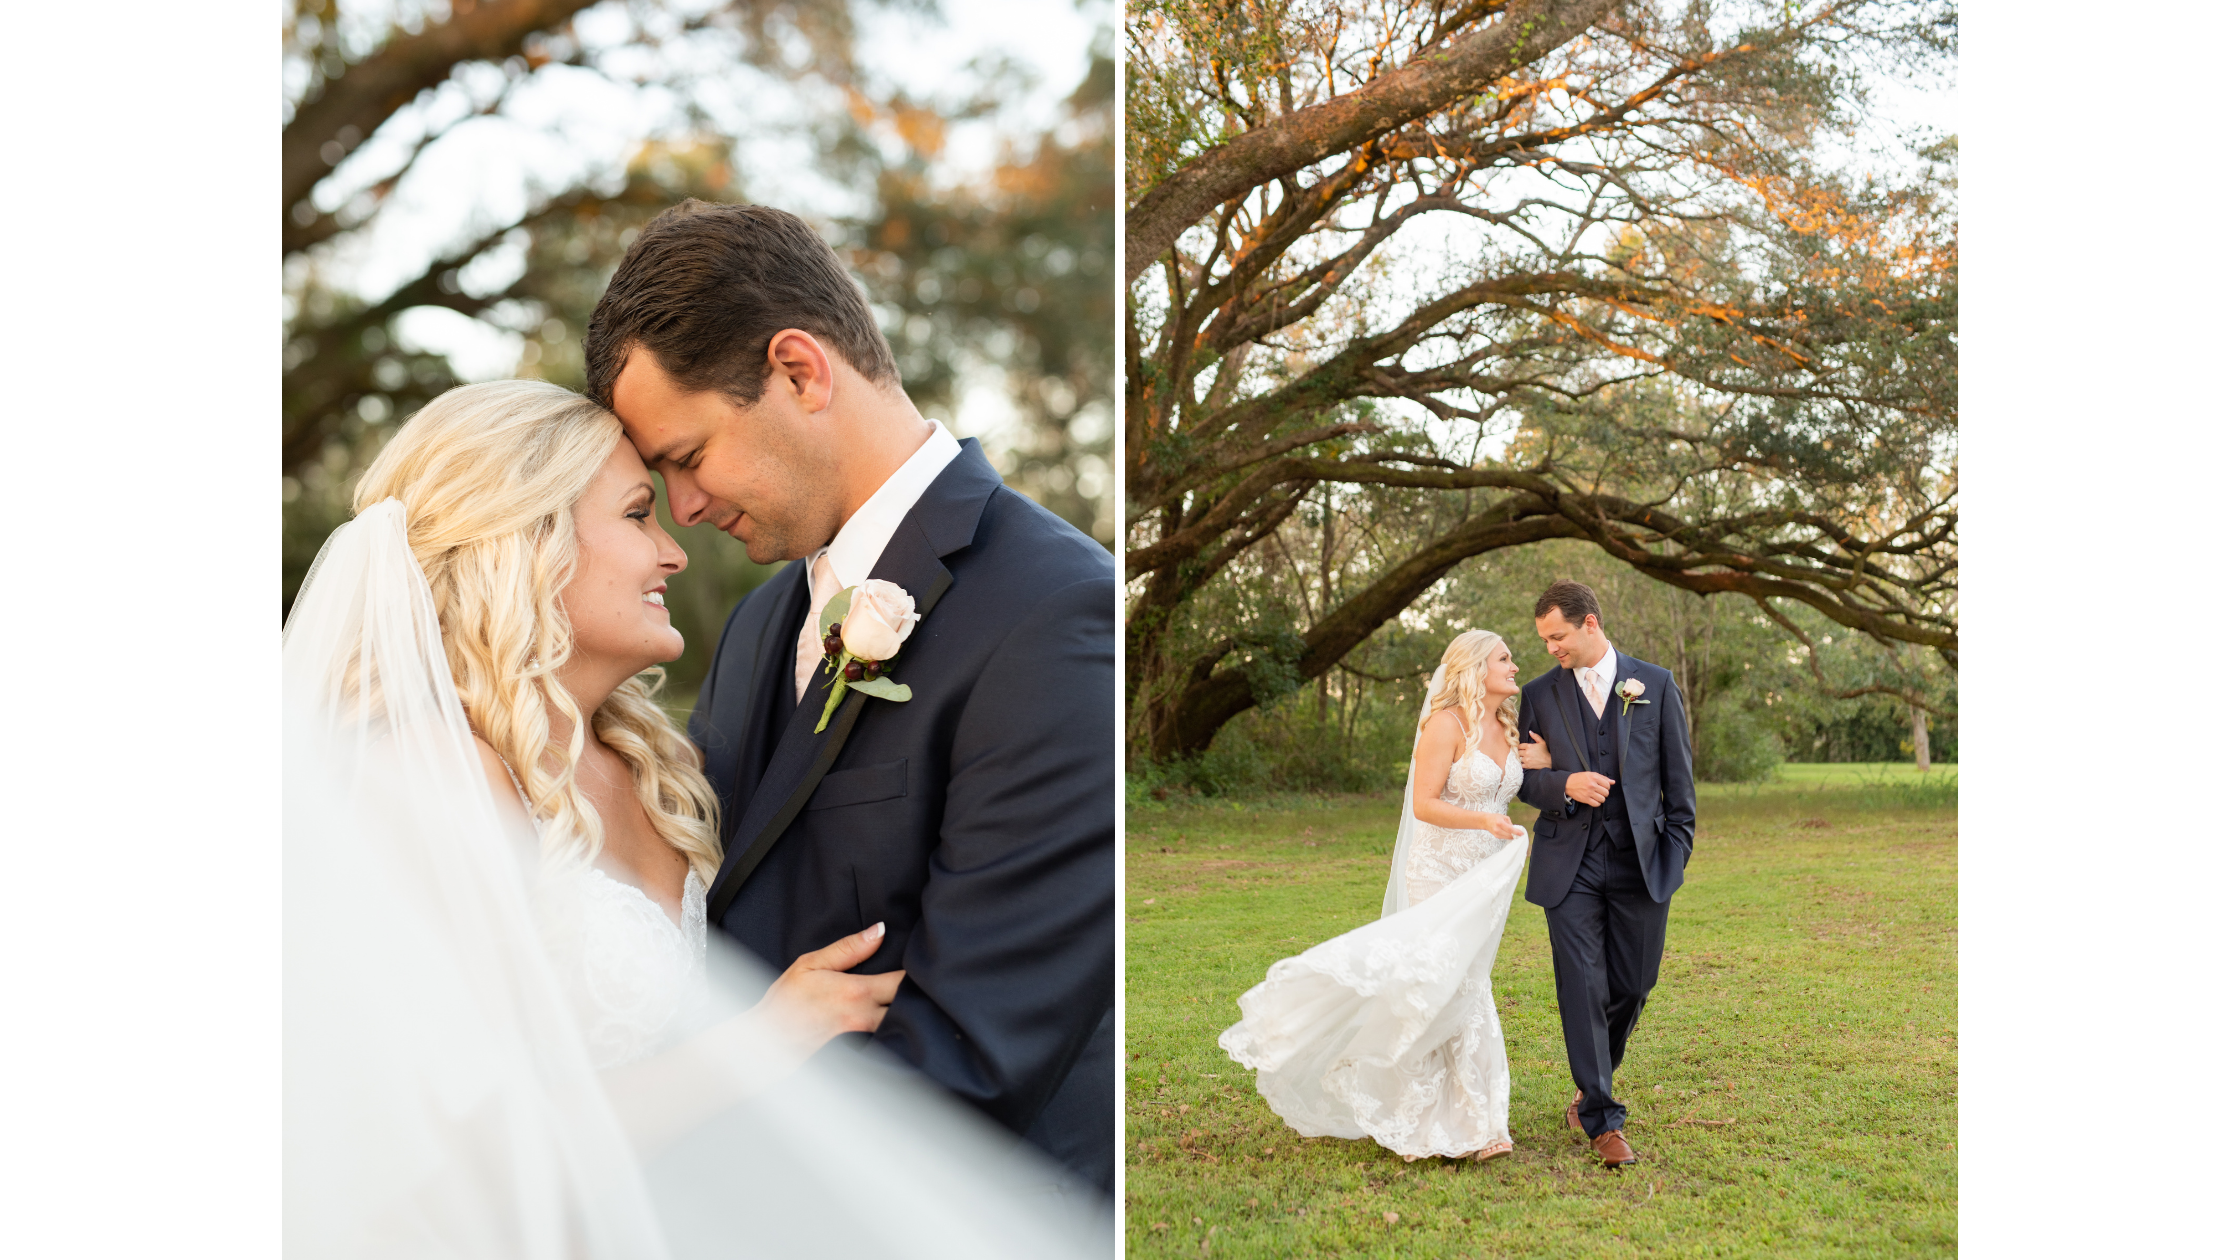 Belforest Pointe Wedding Daphne, AL Photographed by Kristen Marcus Photography